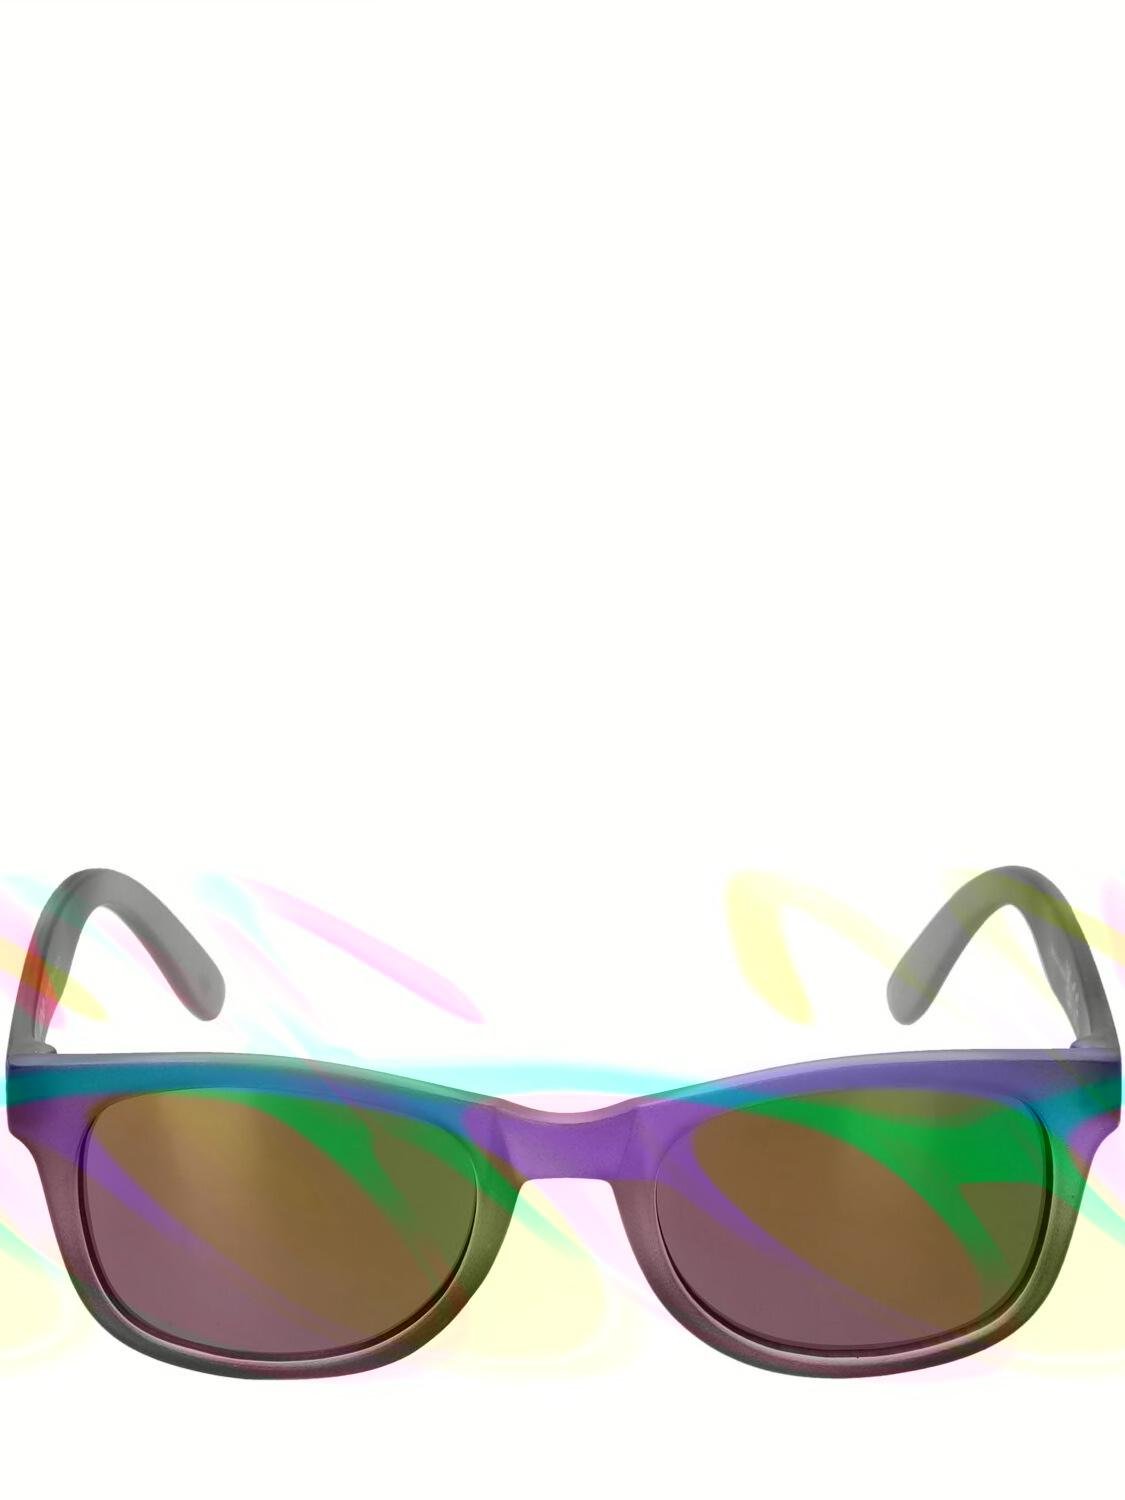 Printed Polycarbonate Sunglasses by MOLO